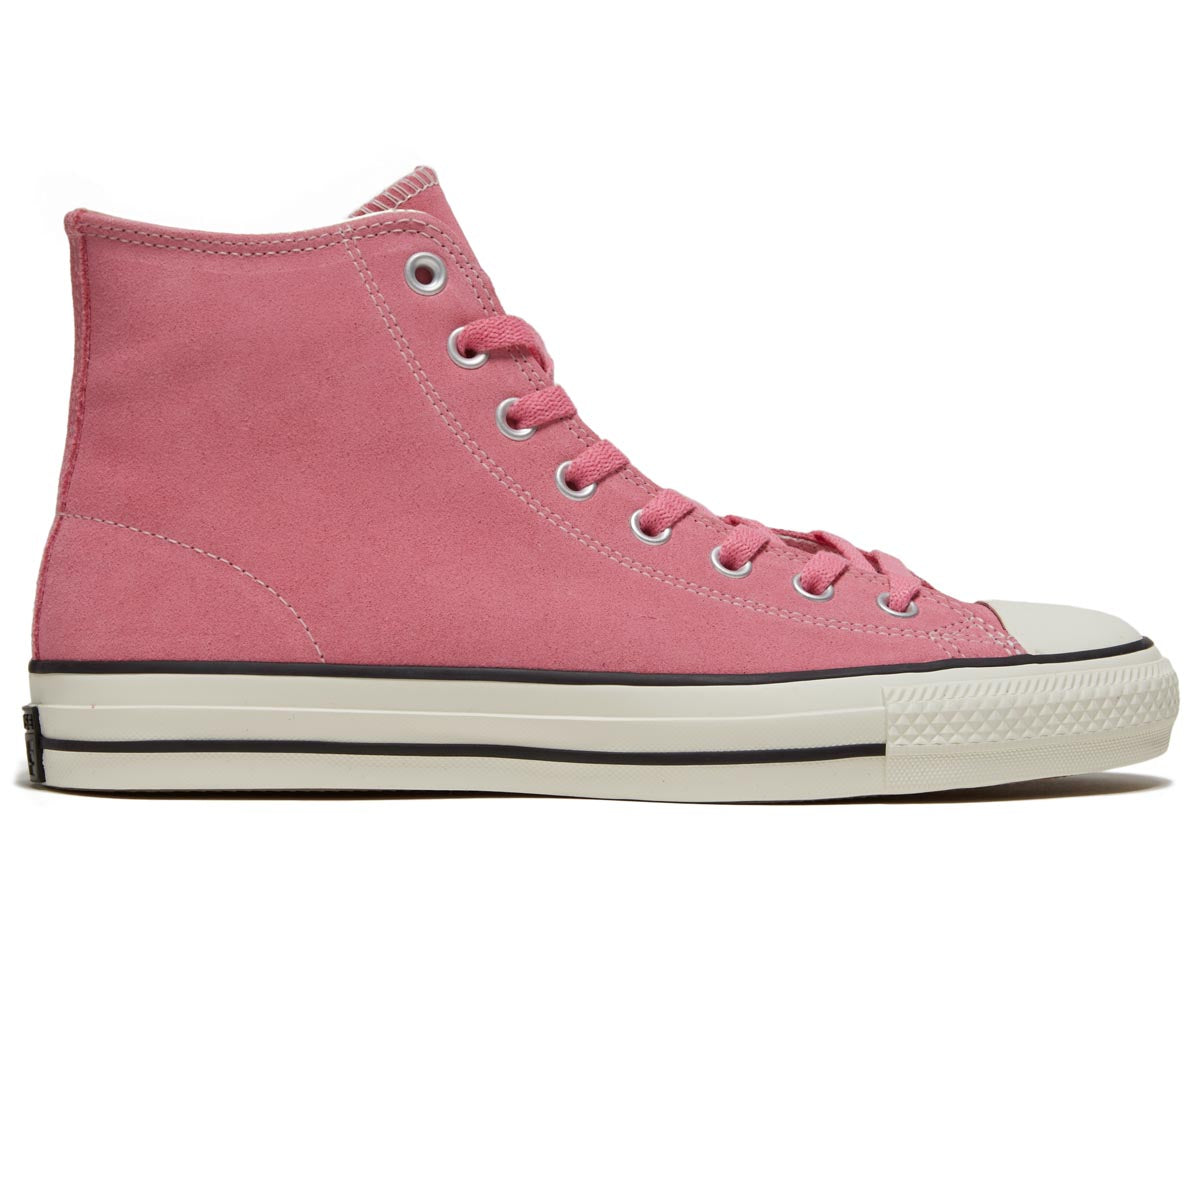 Converse Chuck Taylor All Star Pro Suede Hi Shoes - Oops Pink/Egret/Black image 1